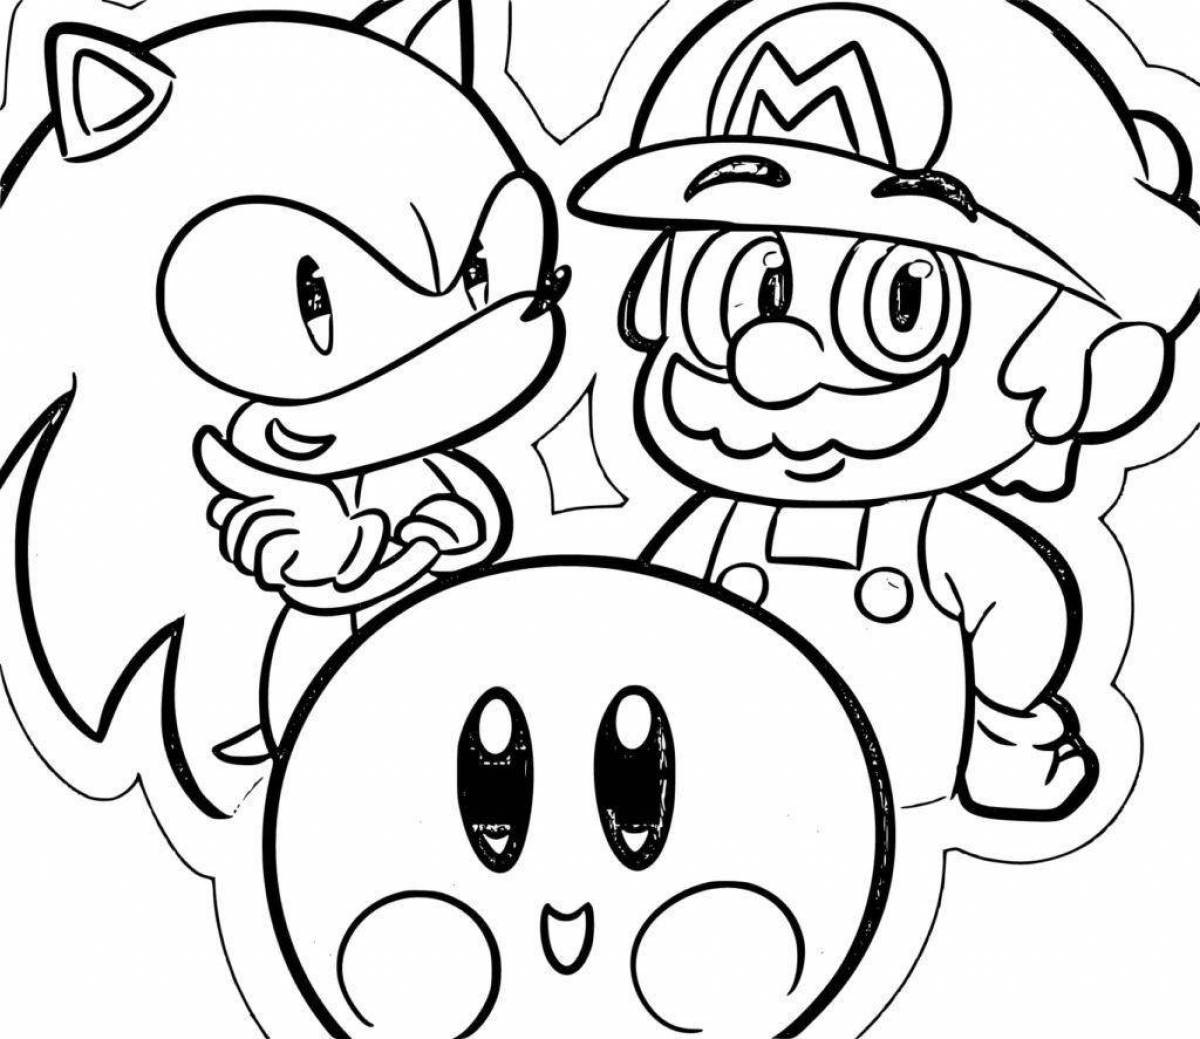 Colorful mario and sonic coloring book